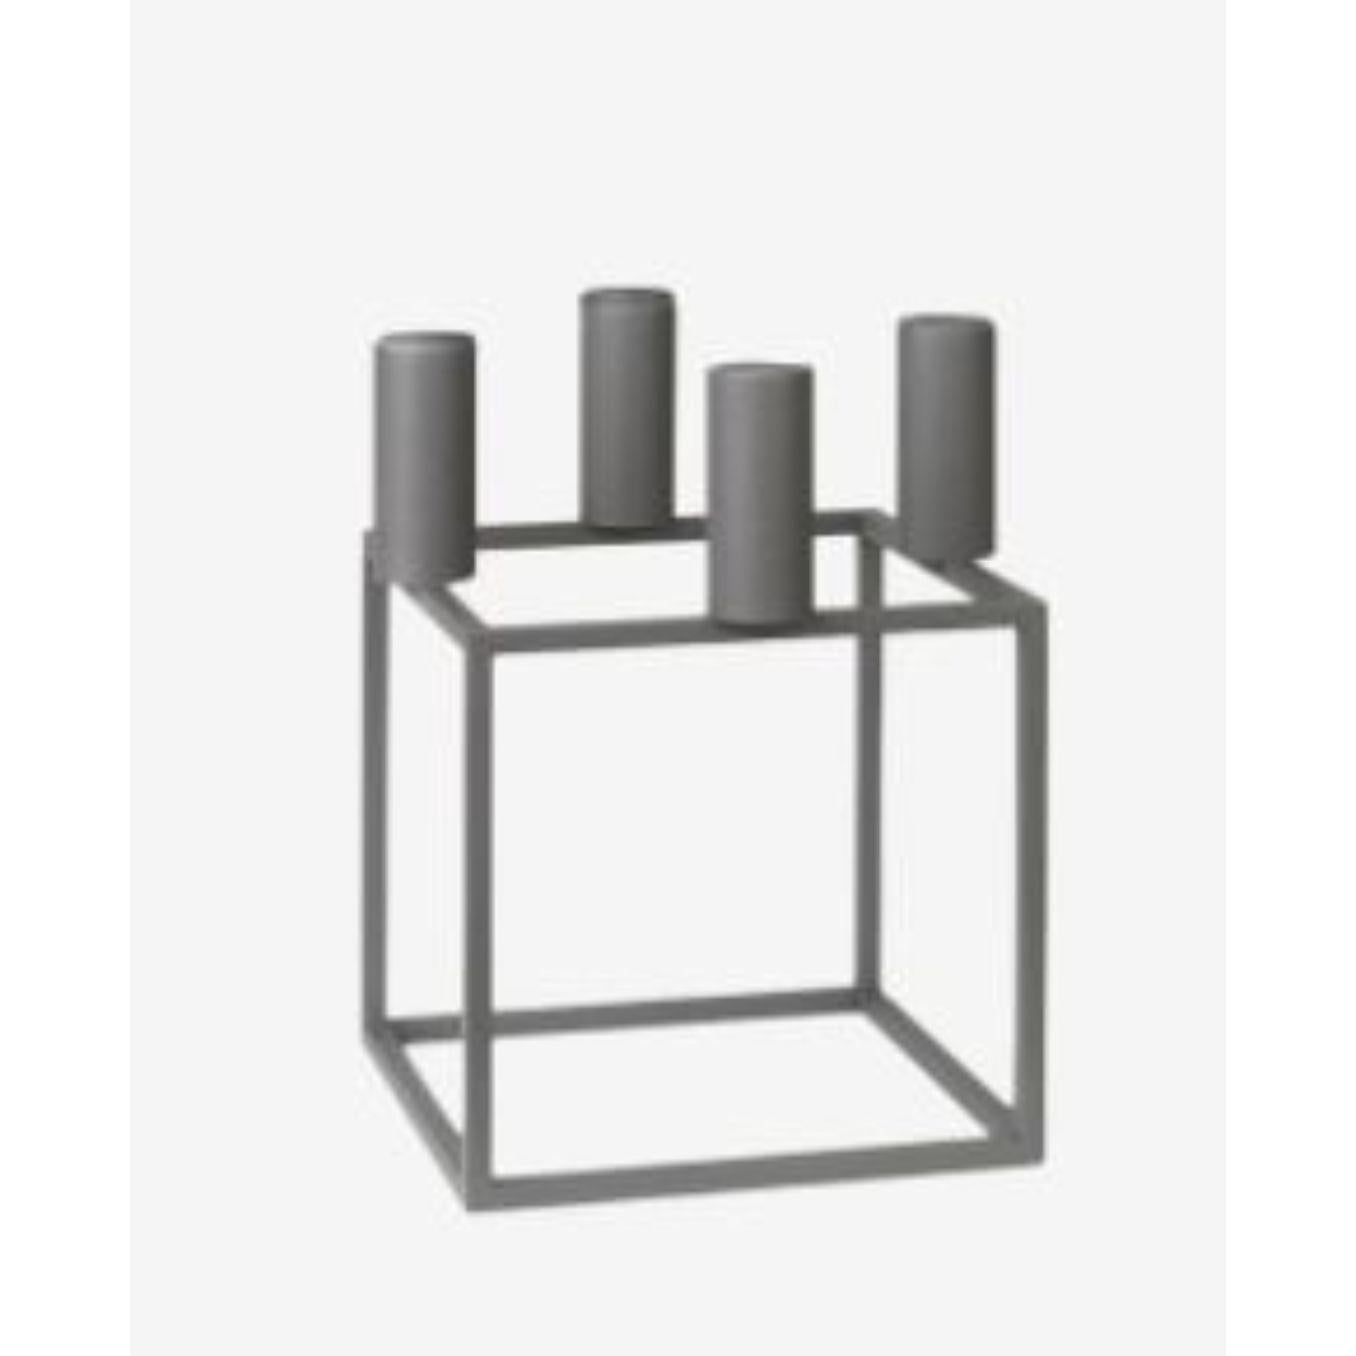 Set of 2 grey Kubus and base 4 candle holder by Lassen
Dimensions: D 14 x W 14 x H 20 cm 
Materials: metal 
Also available in different dimensions.
Weight: 1.50 Kg

A new small wonder has seen the light of day. Kubus Micro is a stylish,